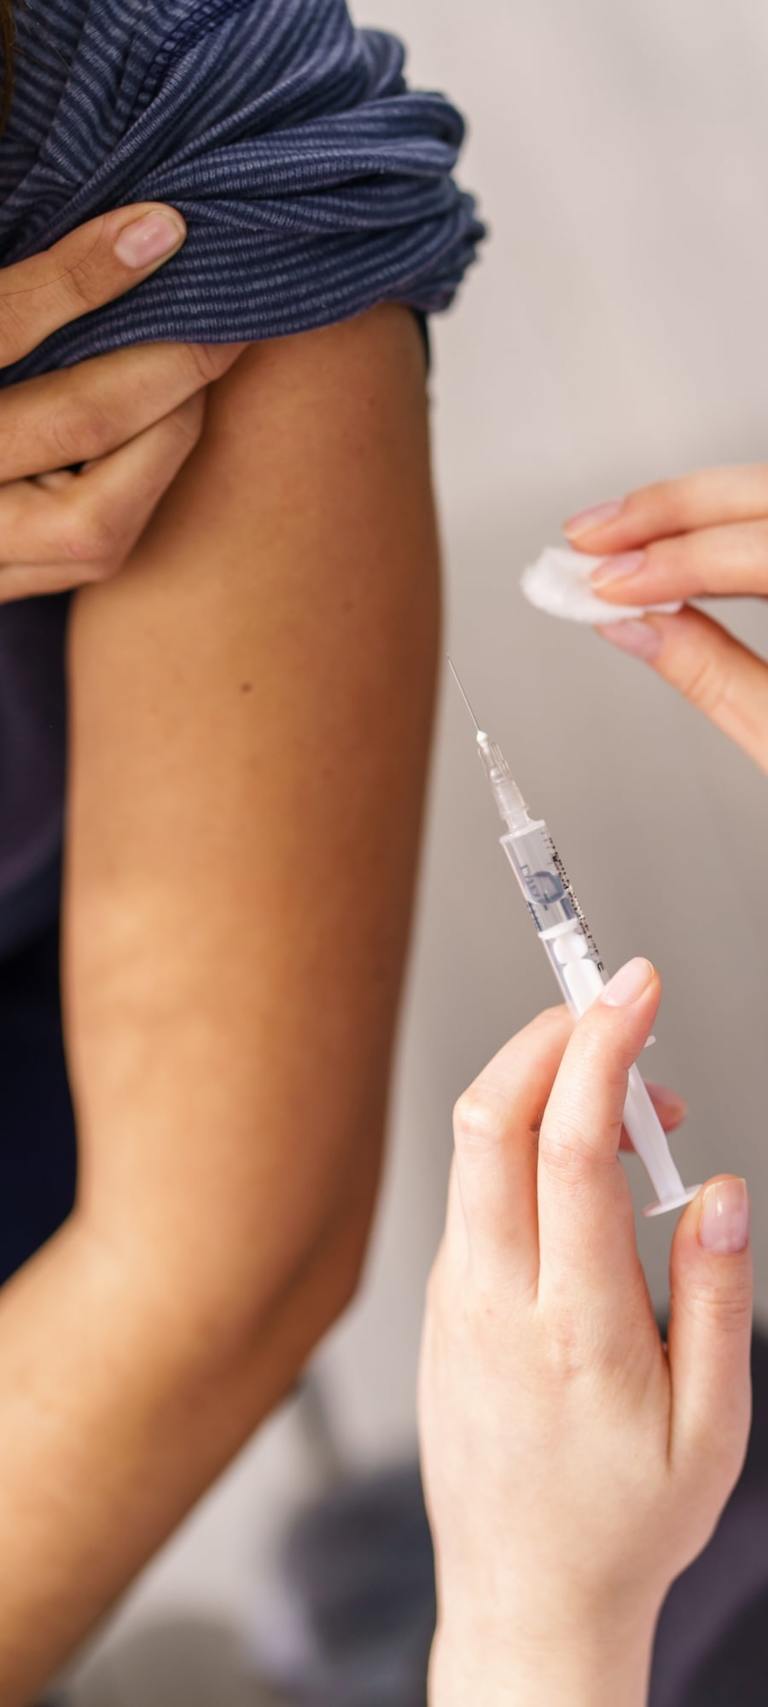 A Woman Receiving An Injection From A Syringe At An Onsite Flu Clinic